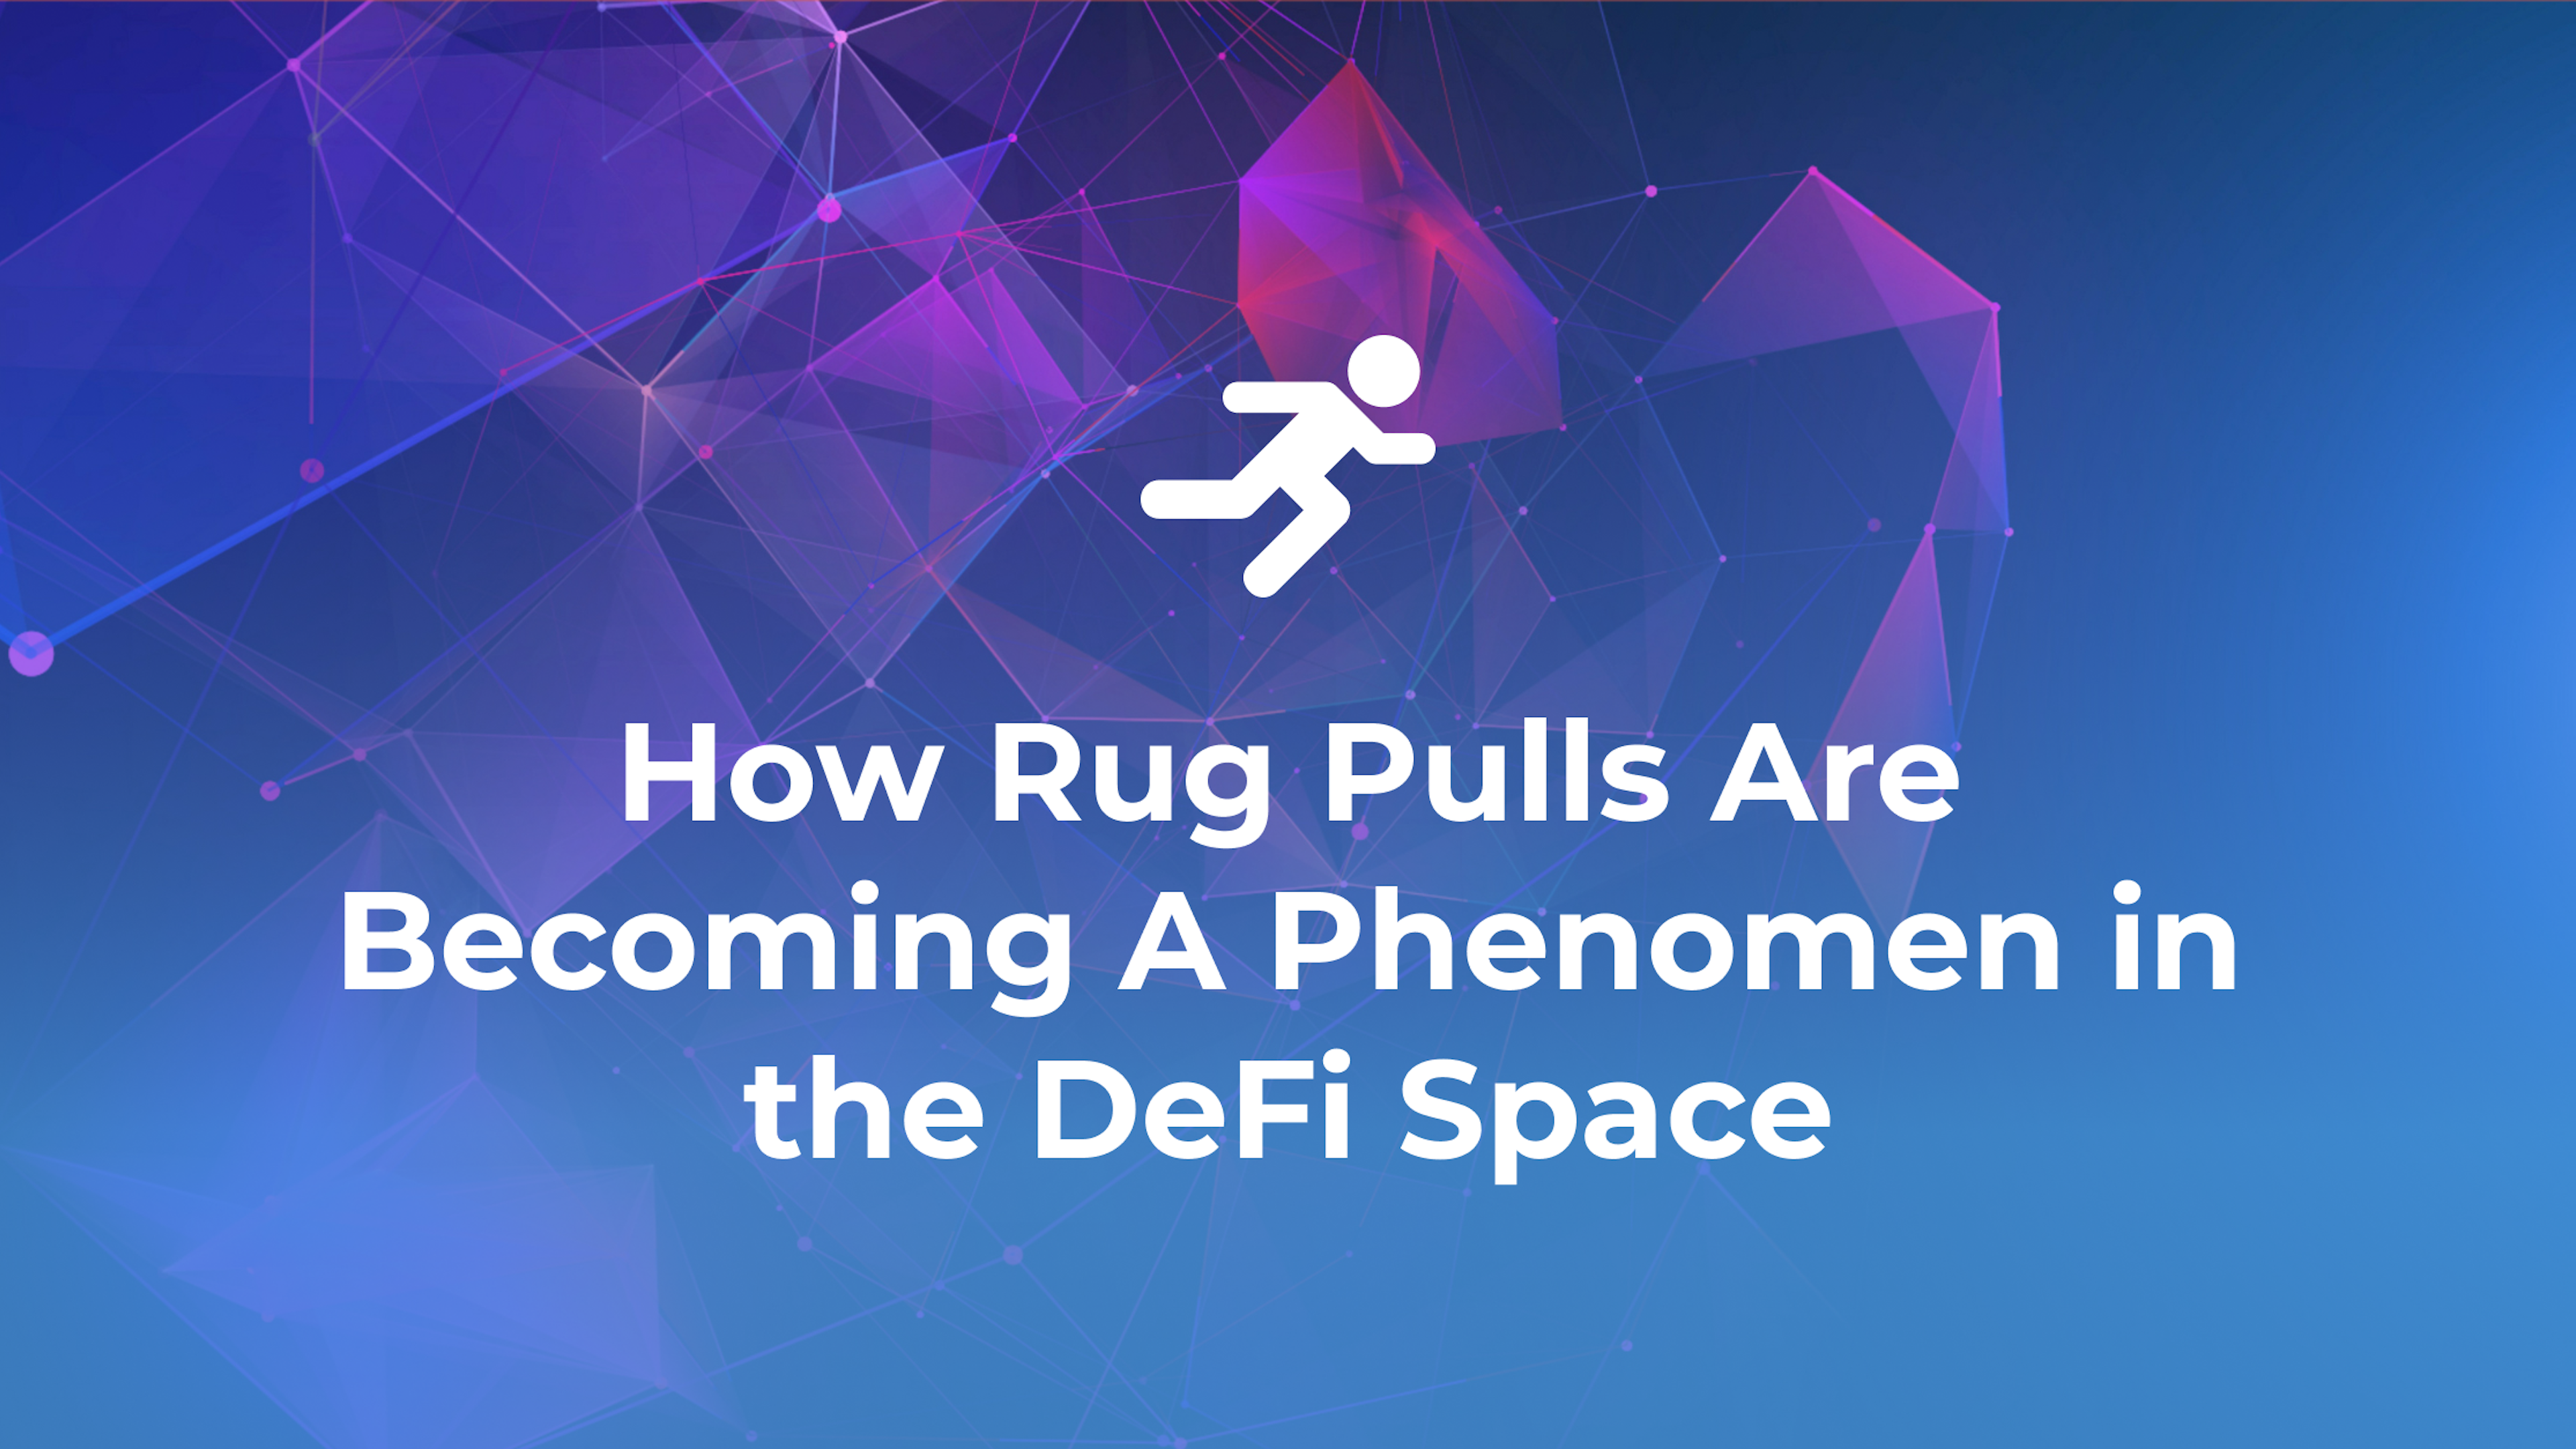 How Rug Pulls Are Becoming A Phenomen in the DeFi Space